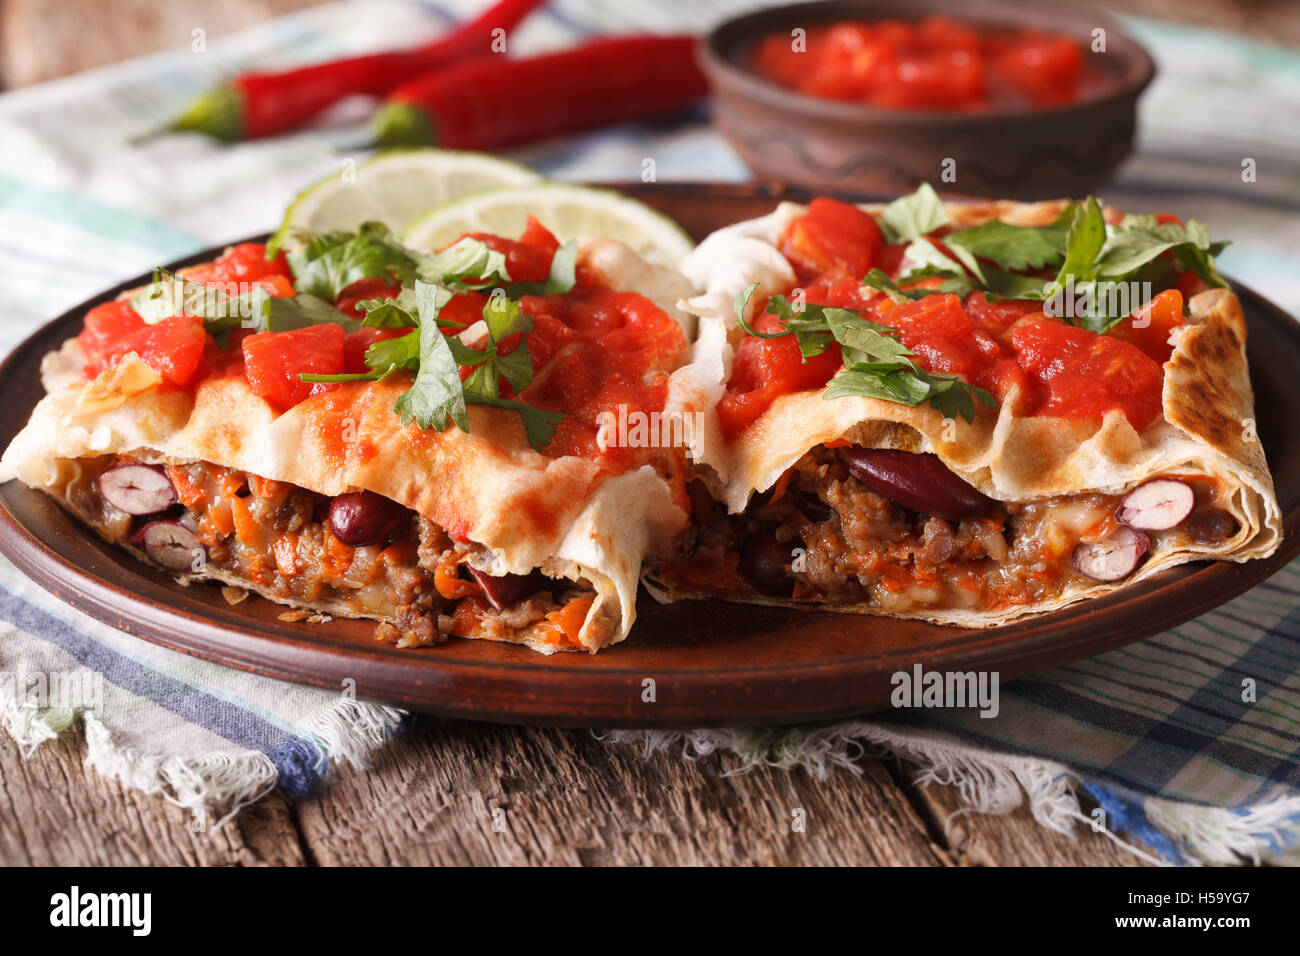 Mexican rolls: chimichanga with tomato salsa on a plate close-up horizontal Stock Photo